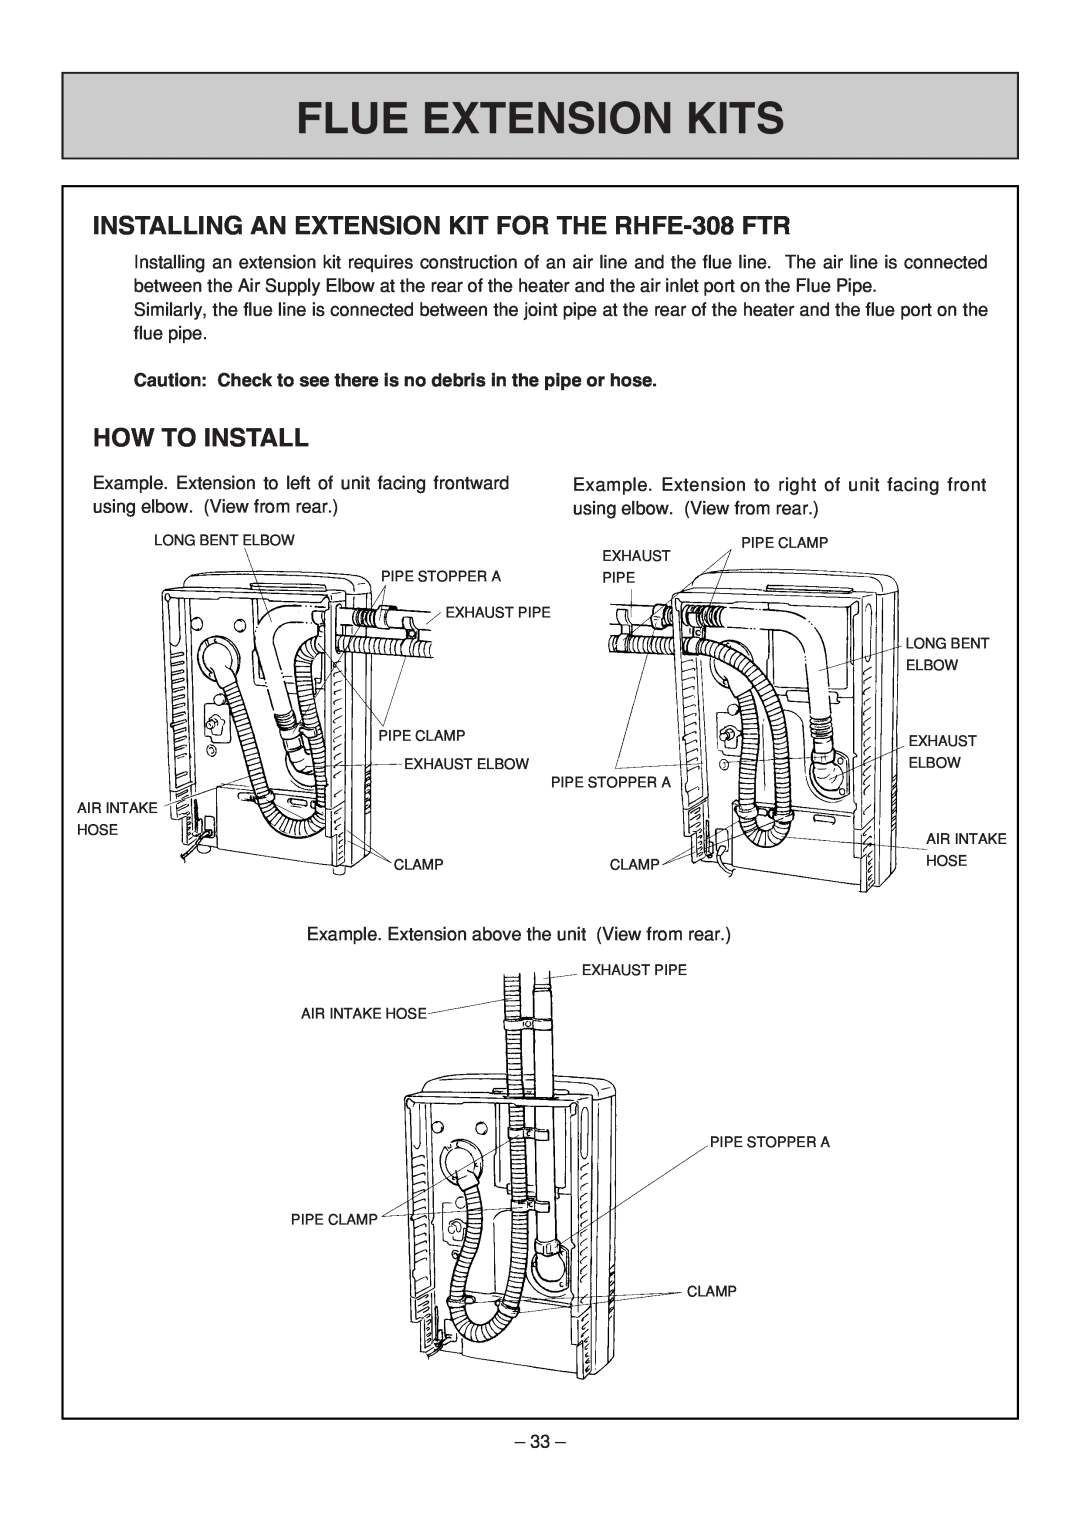 Rinnai RHFE-308 FTR user manual Flue Extension Kits, INSTALLING AN EXTENSION KIT FOR THE RHFE-308FTR, How To Install 